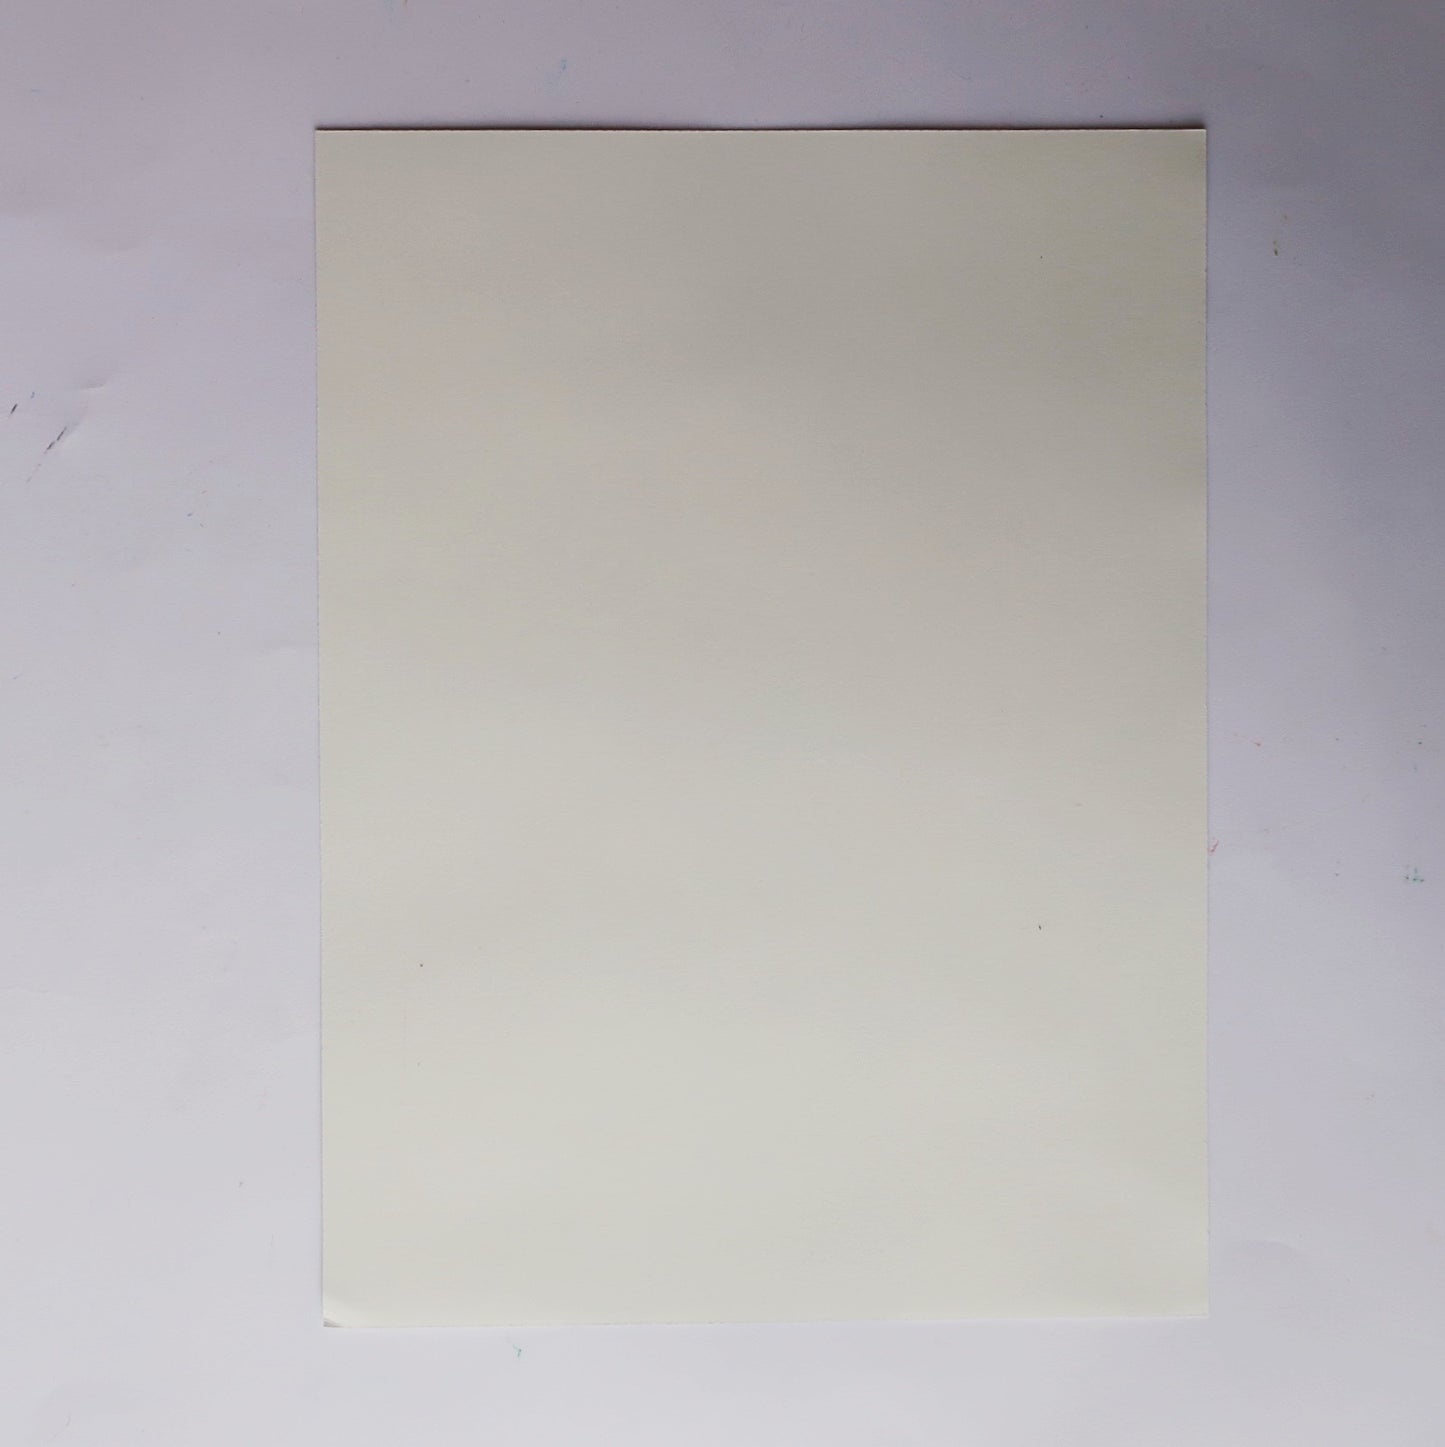 A white sheet of paper